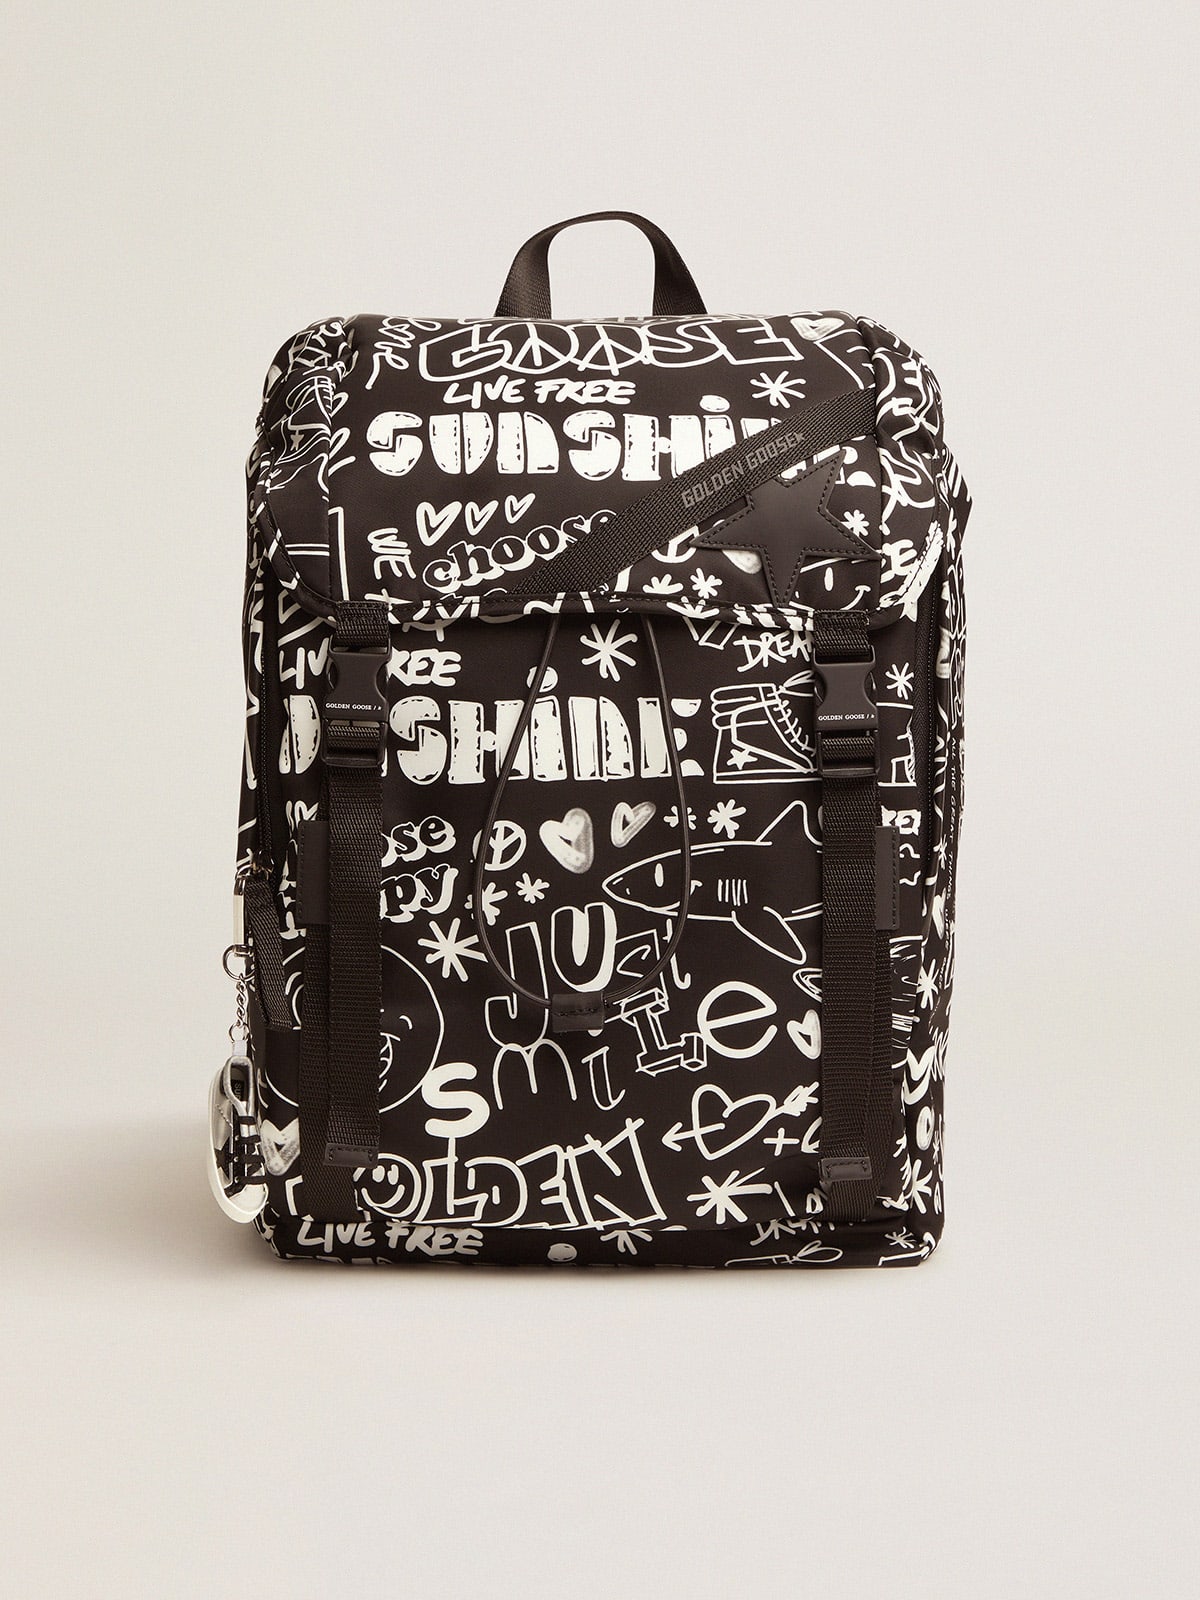 Golden Goose - Journey backpack in black nylon with contrasting white decorations in 